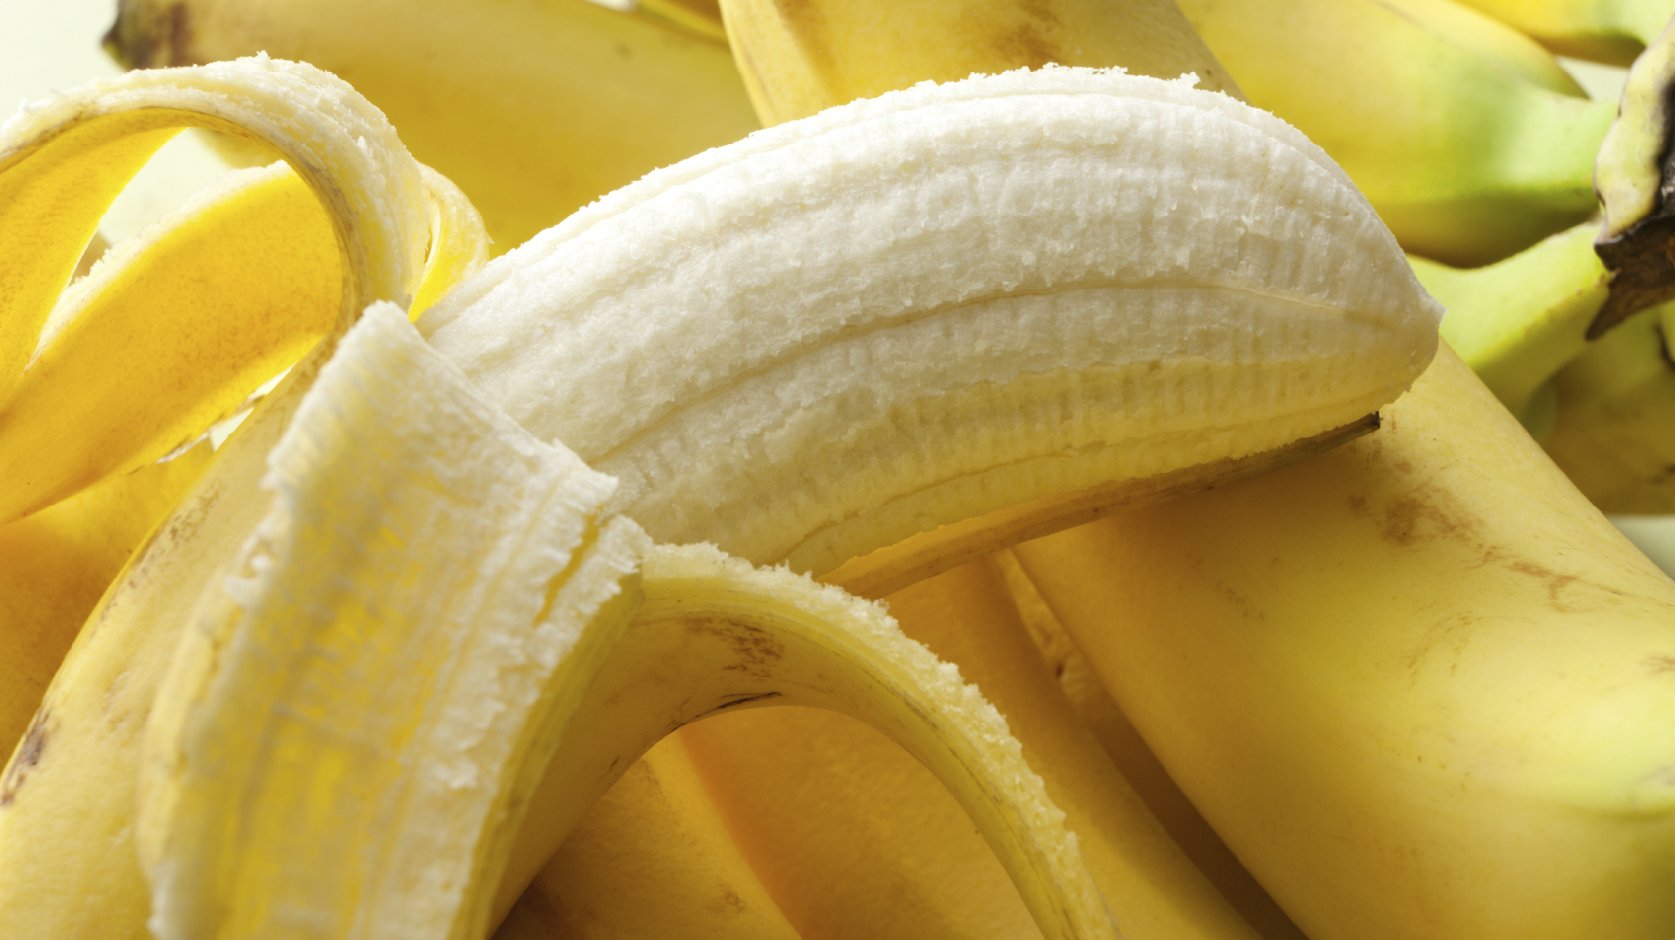 Bananas can be used in lots of recipes. Photo: iStockphoto